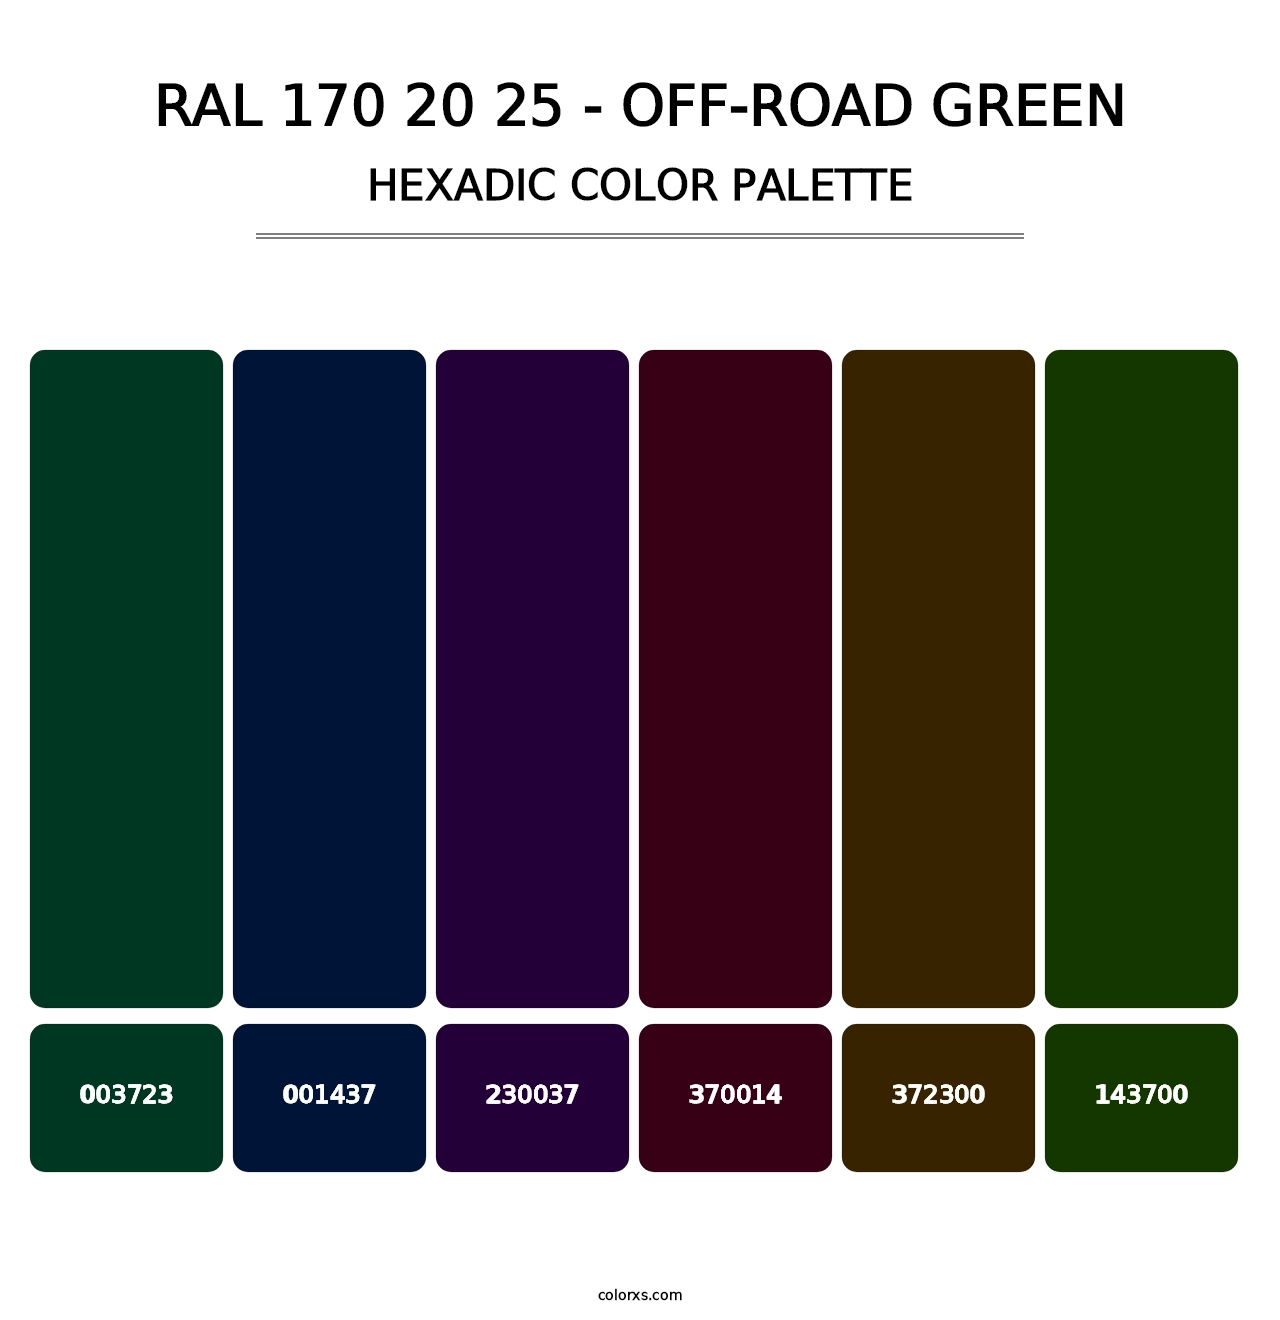 RAL 170 20 25 - Off-Road Green - Hexadic Color Palette